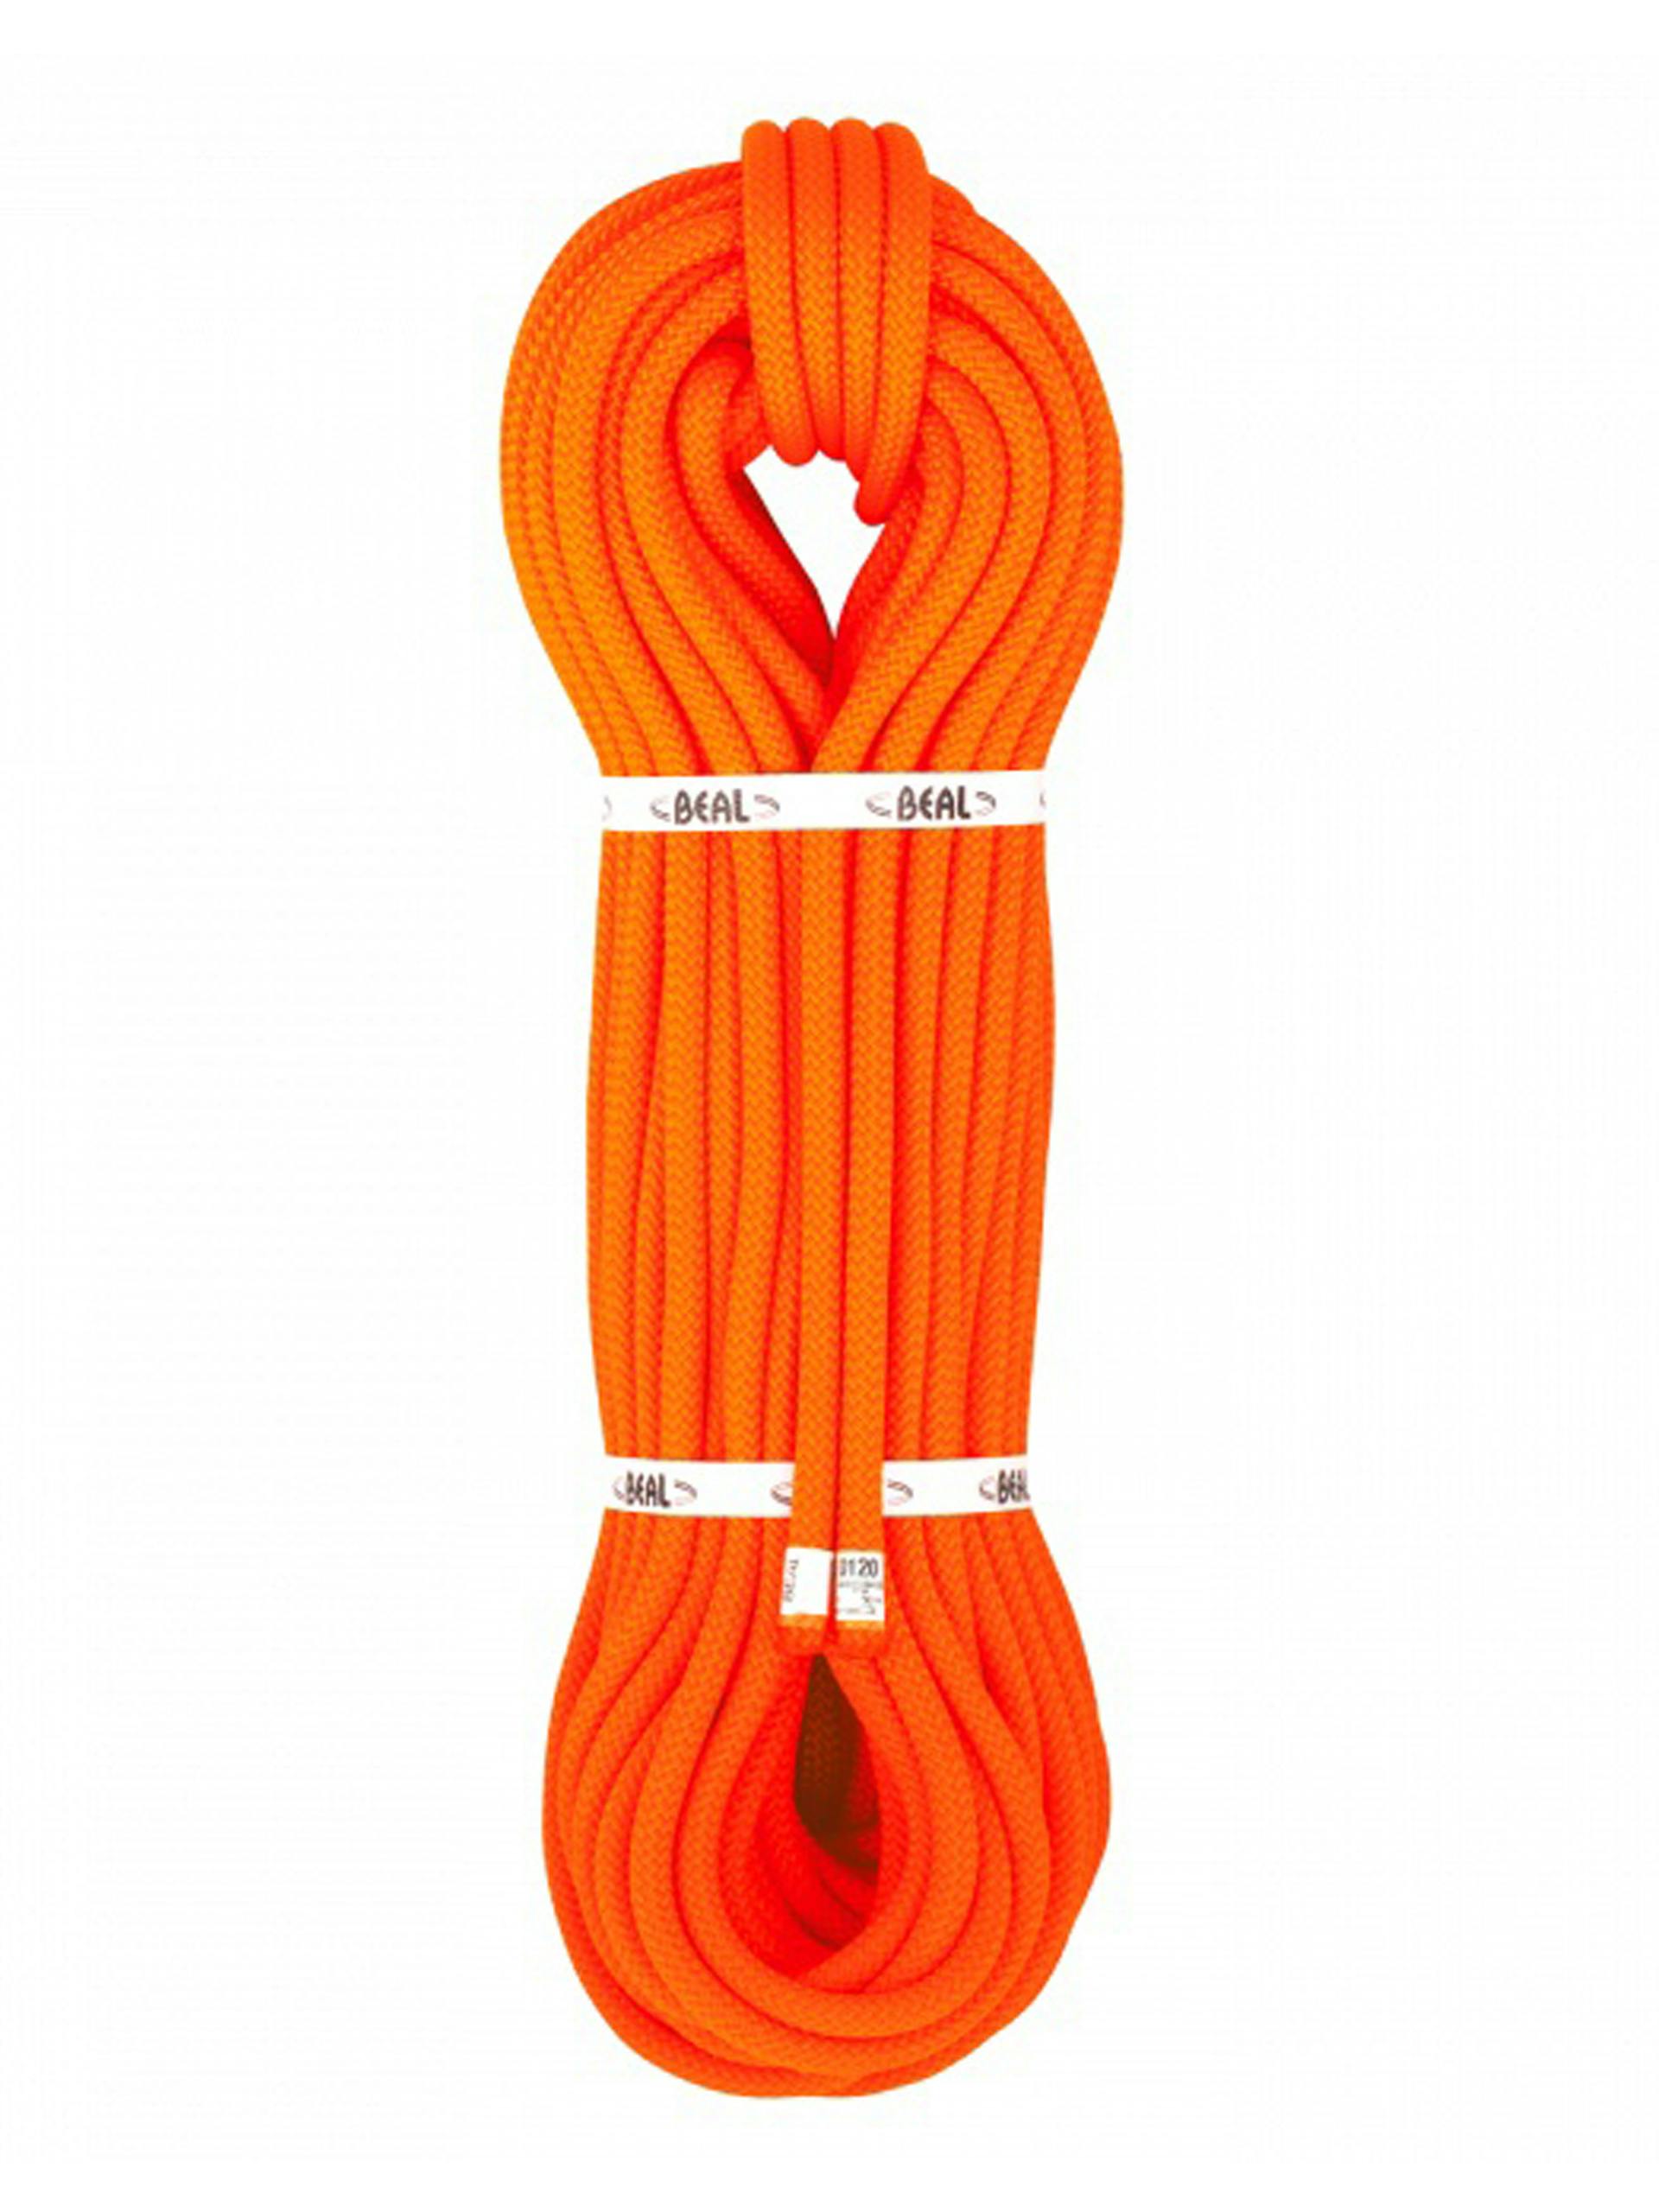 https://images.abaris.co.uk/products/535/beal-rescue-rope-10.jpg?auto=format